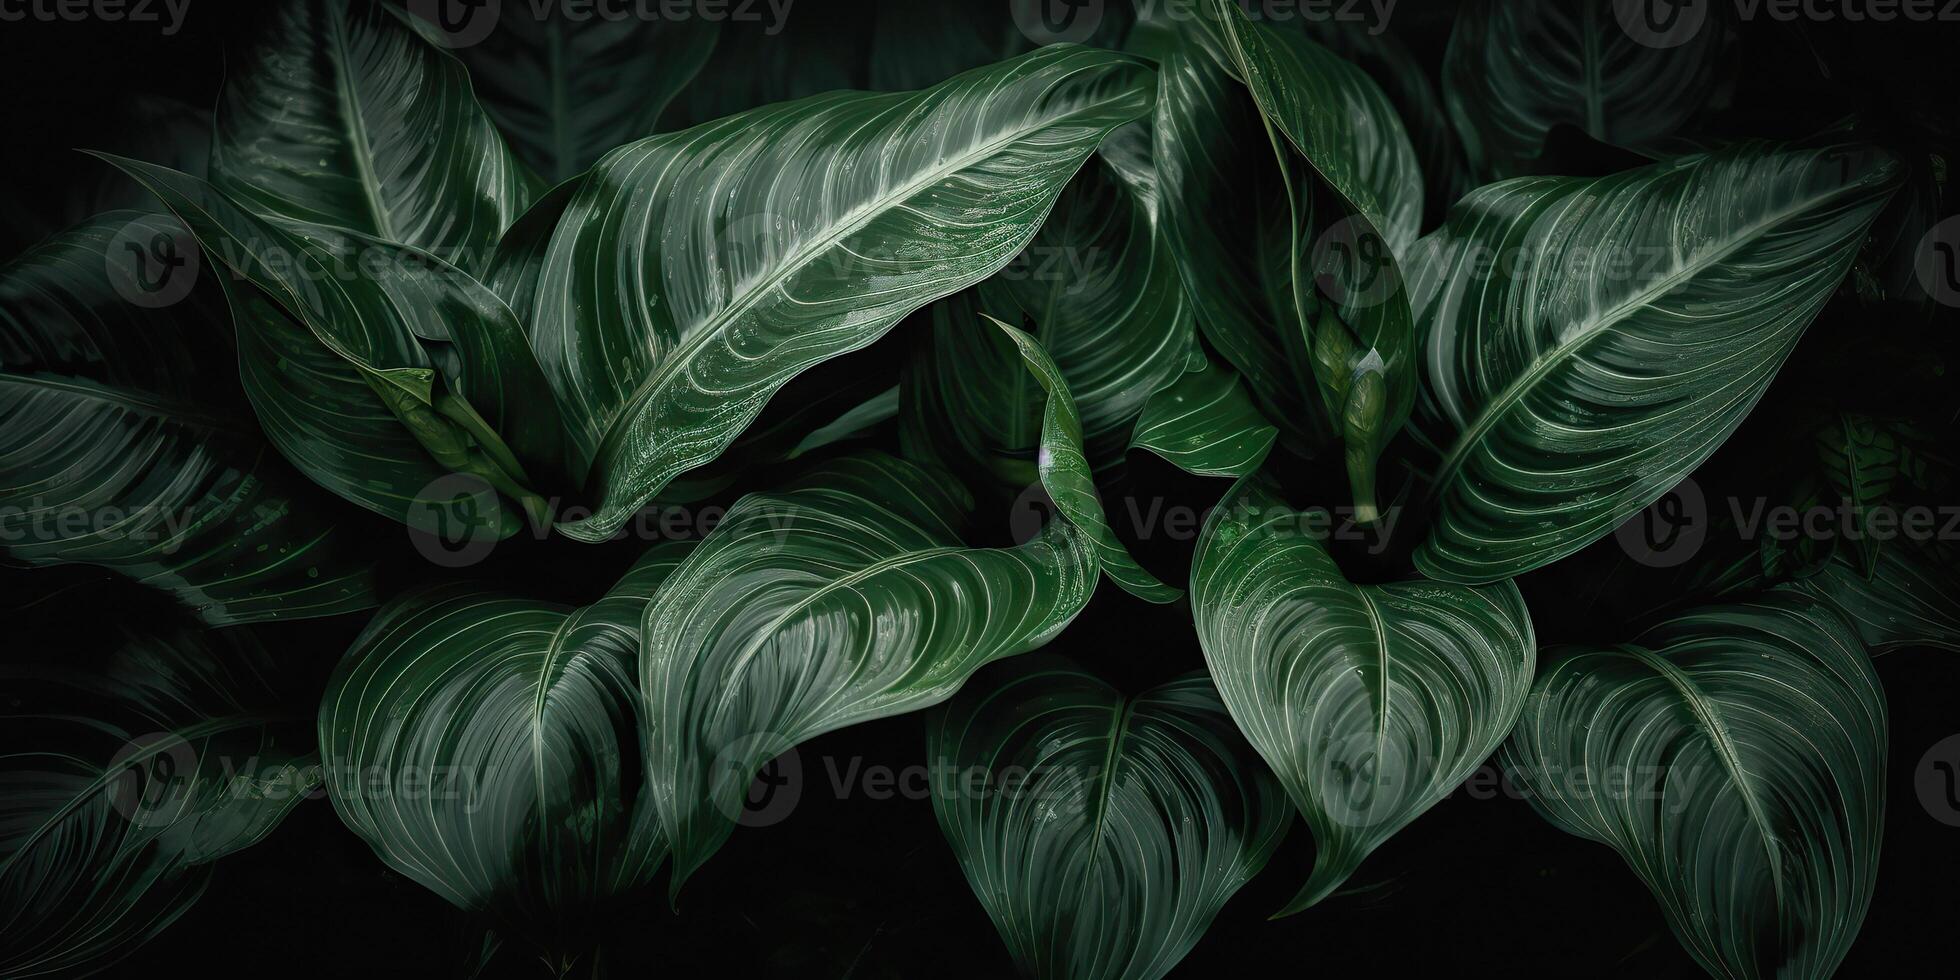 Leaves of spathiphyllum cannifolium abstract green dark texture nature background tropical leaf decorative background scene photo